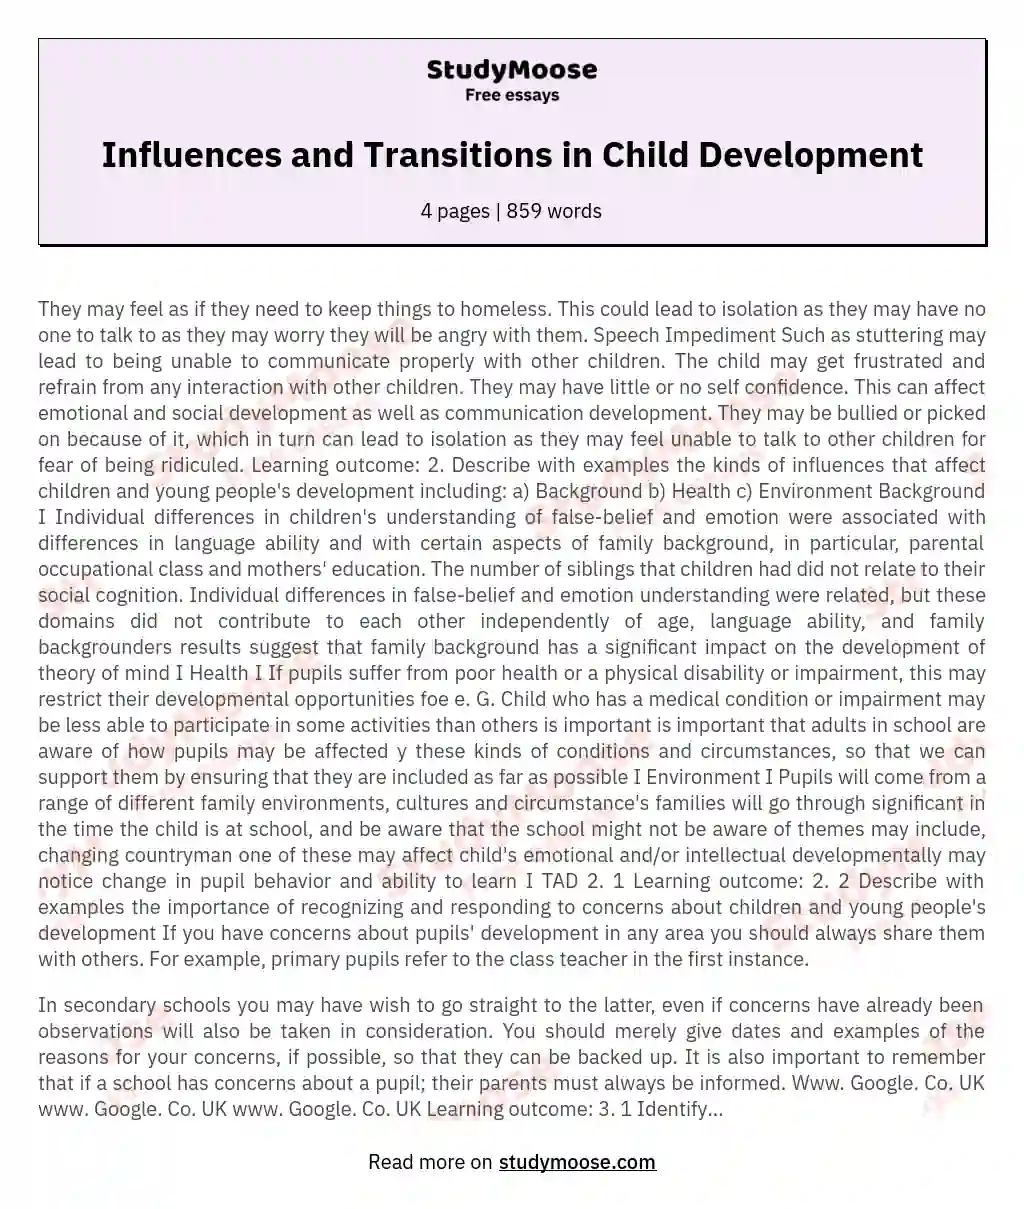 Influences and Transitions in Child Development essay